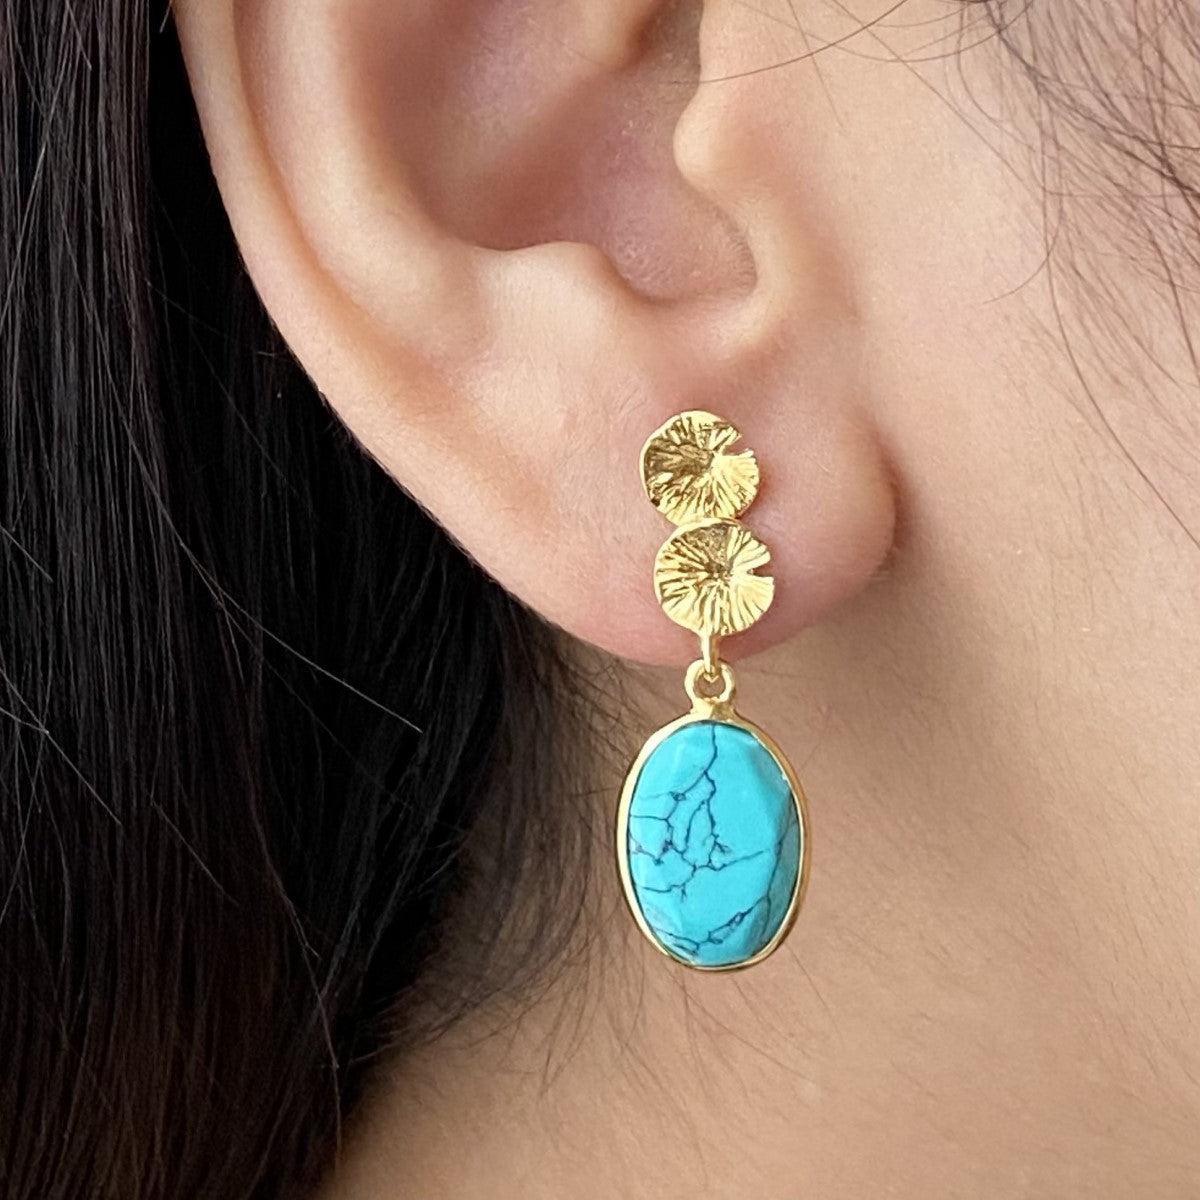 Lily Pad Earrings in Gold Plated Sterling Silver with a Turquoise Gemstone Drop